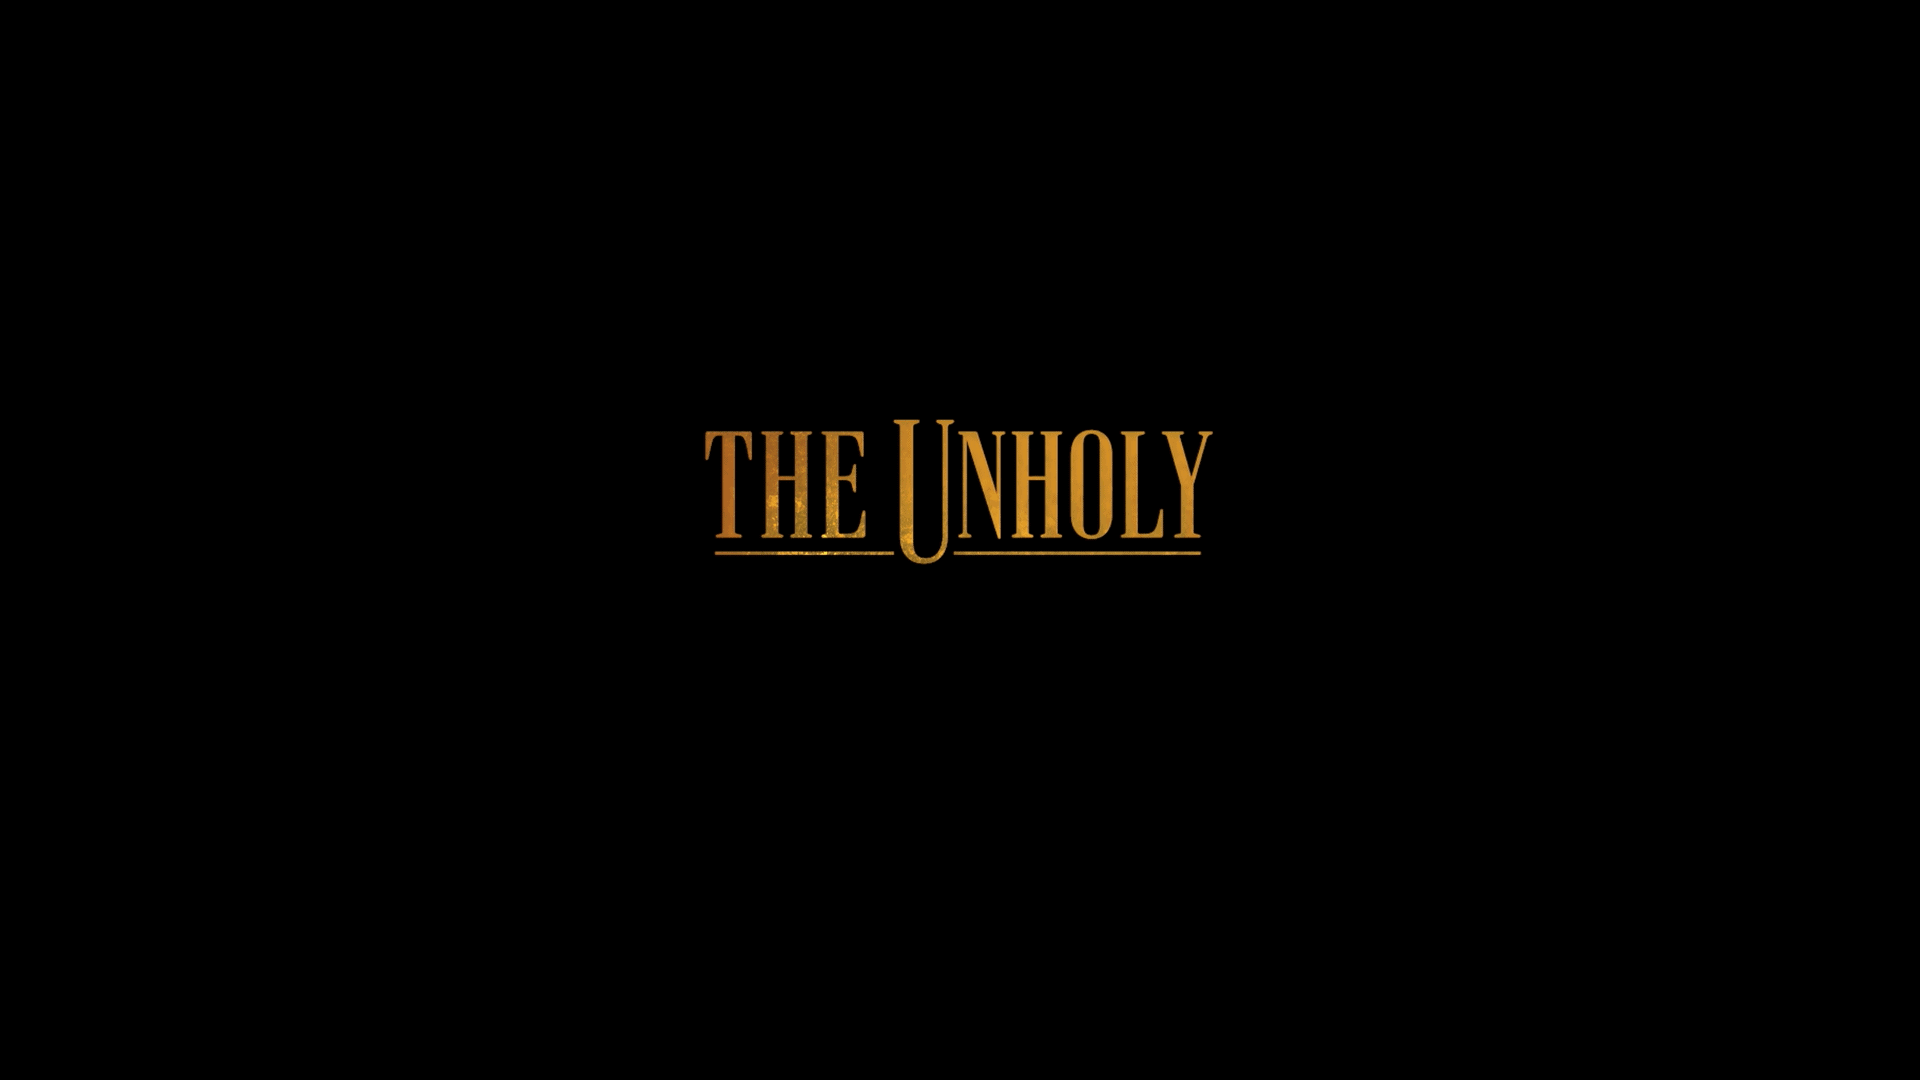 The Unholy 2021 Wallpapers